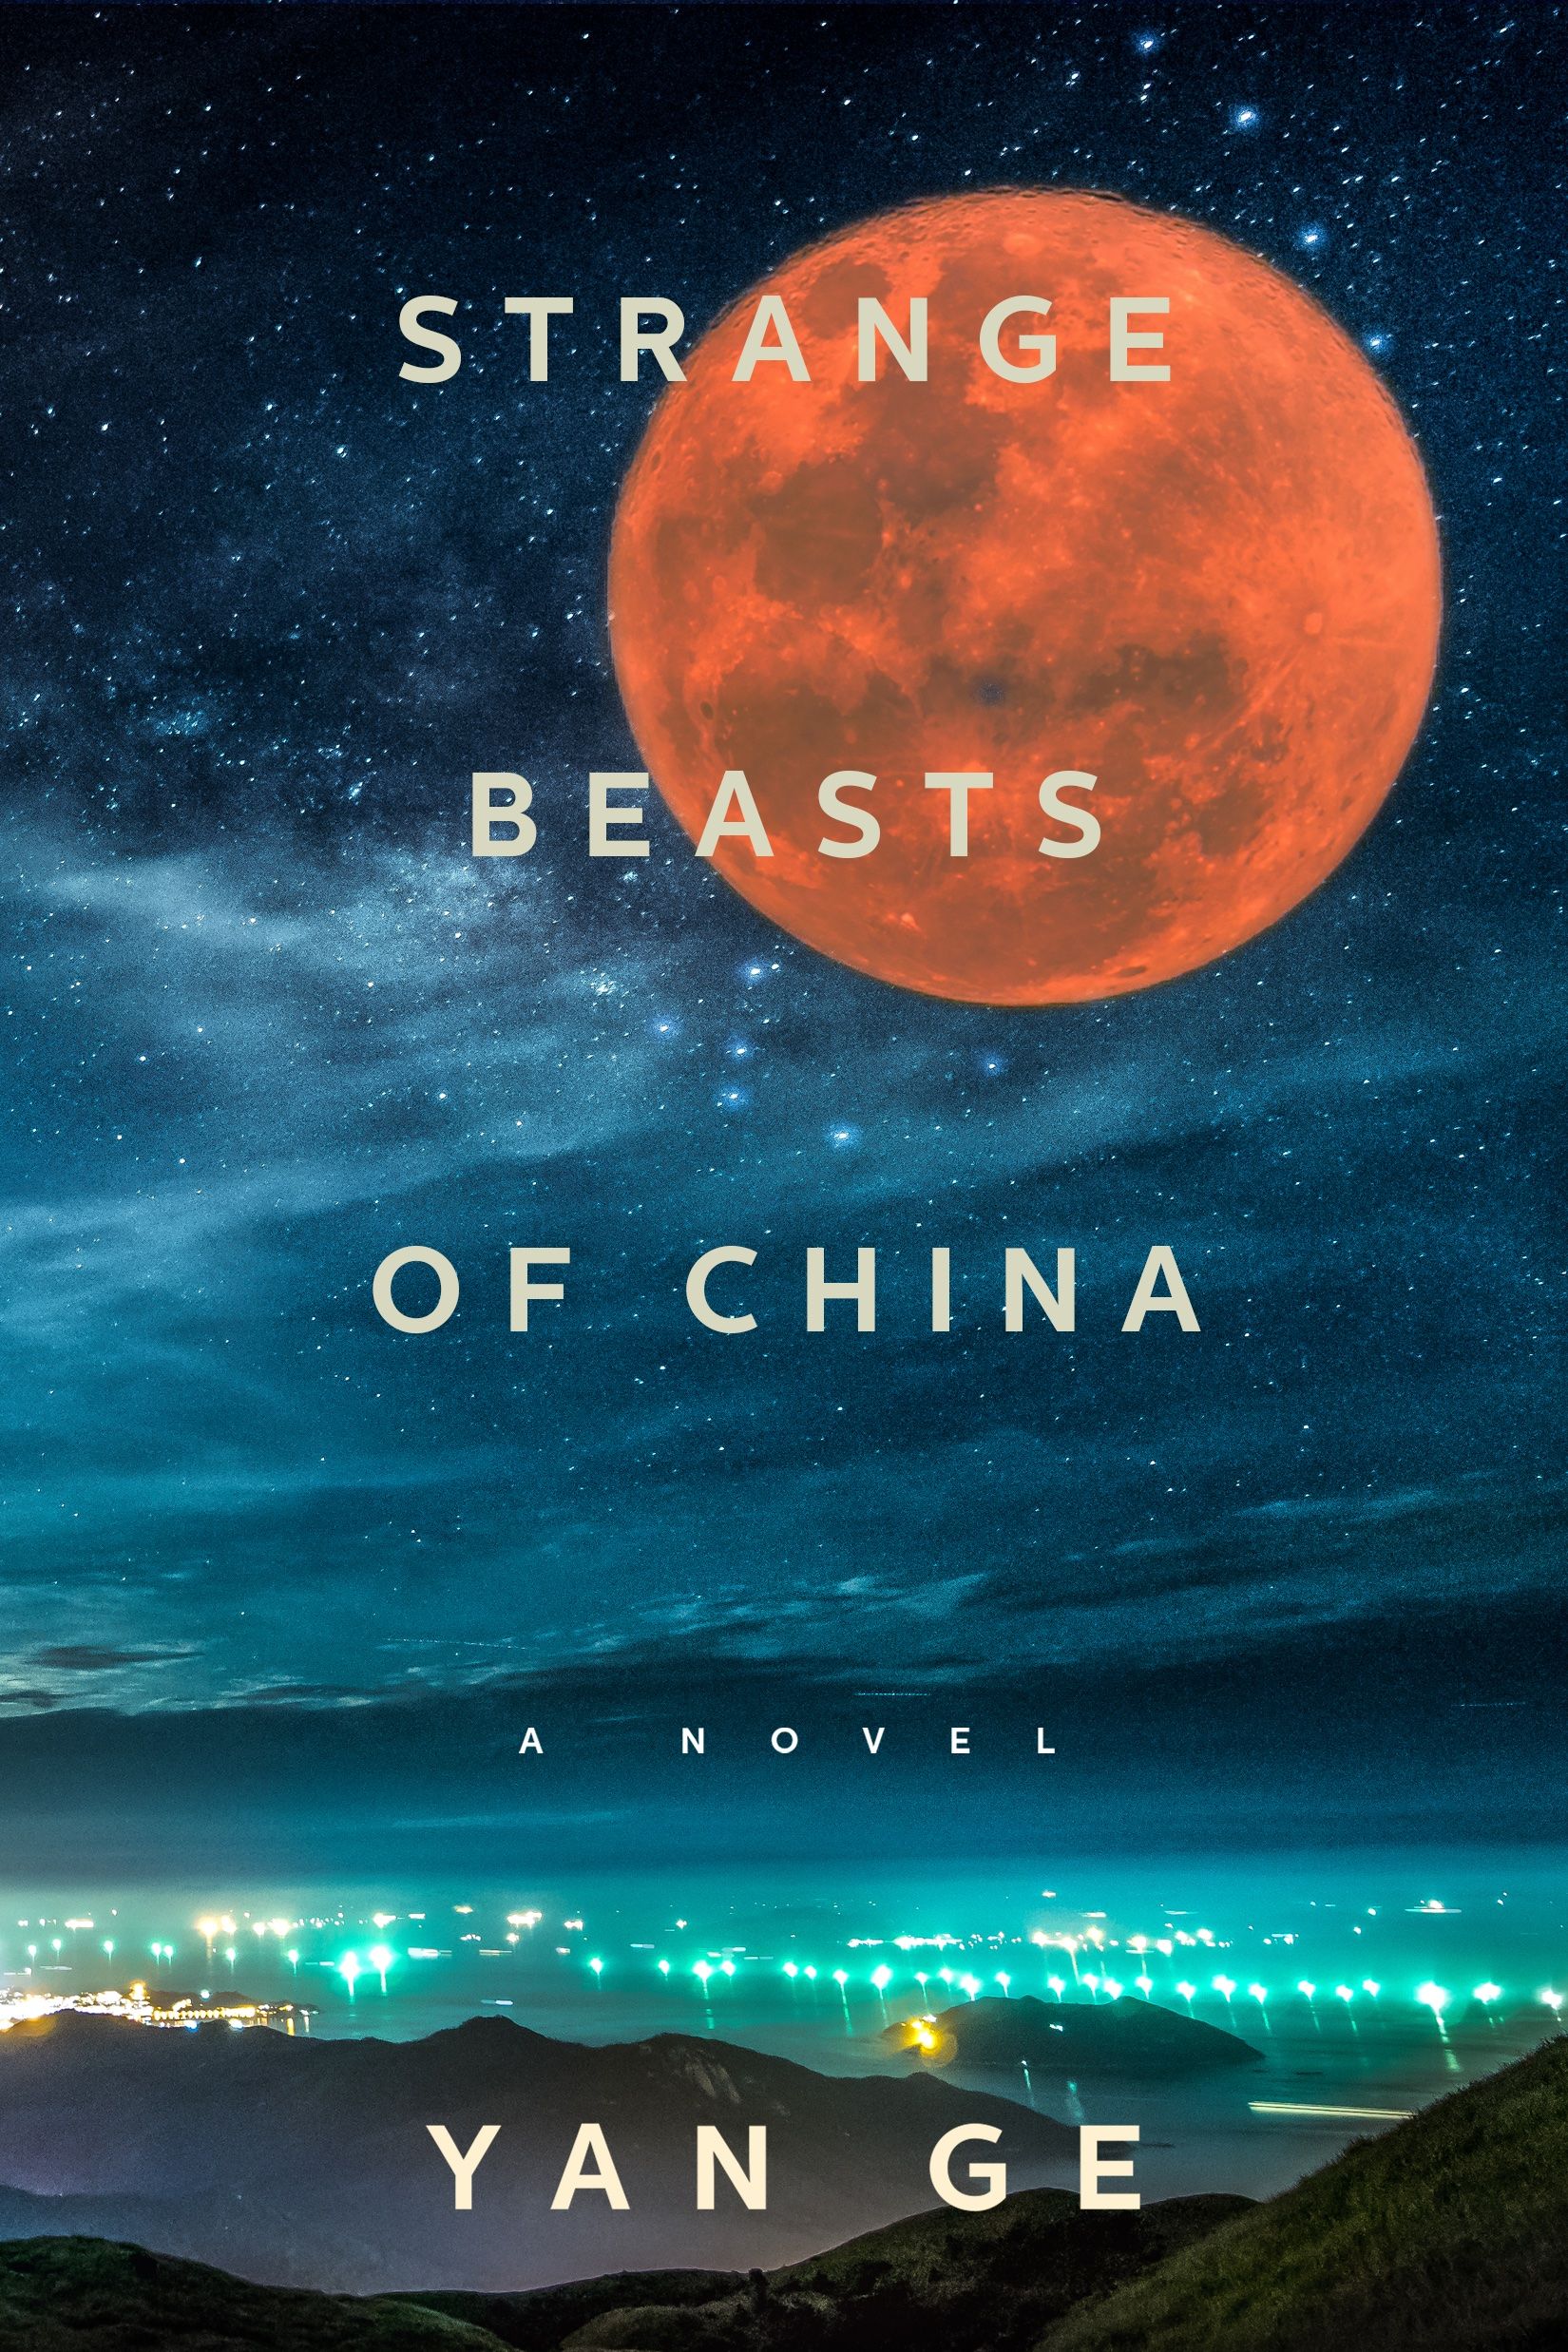 Strange Beasts of China by Yan Ge, translated by Jeremy Tiang